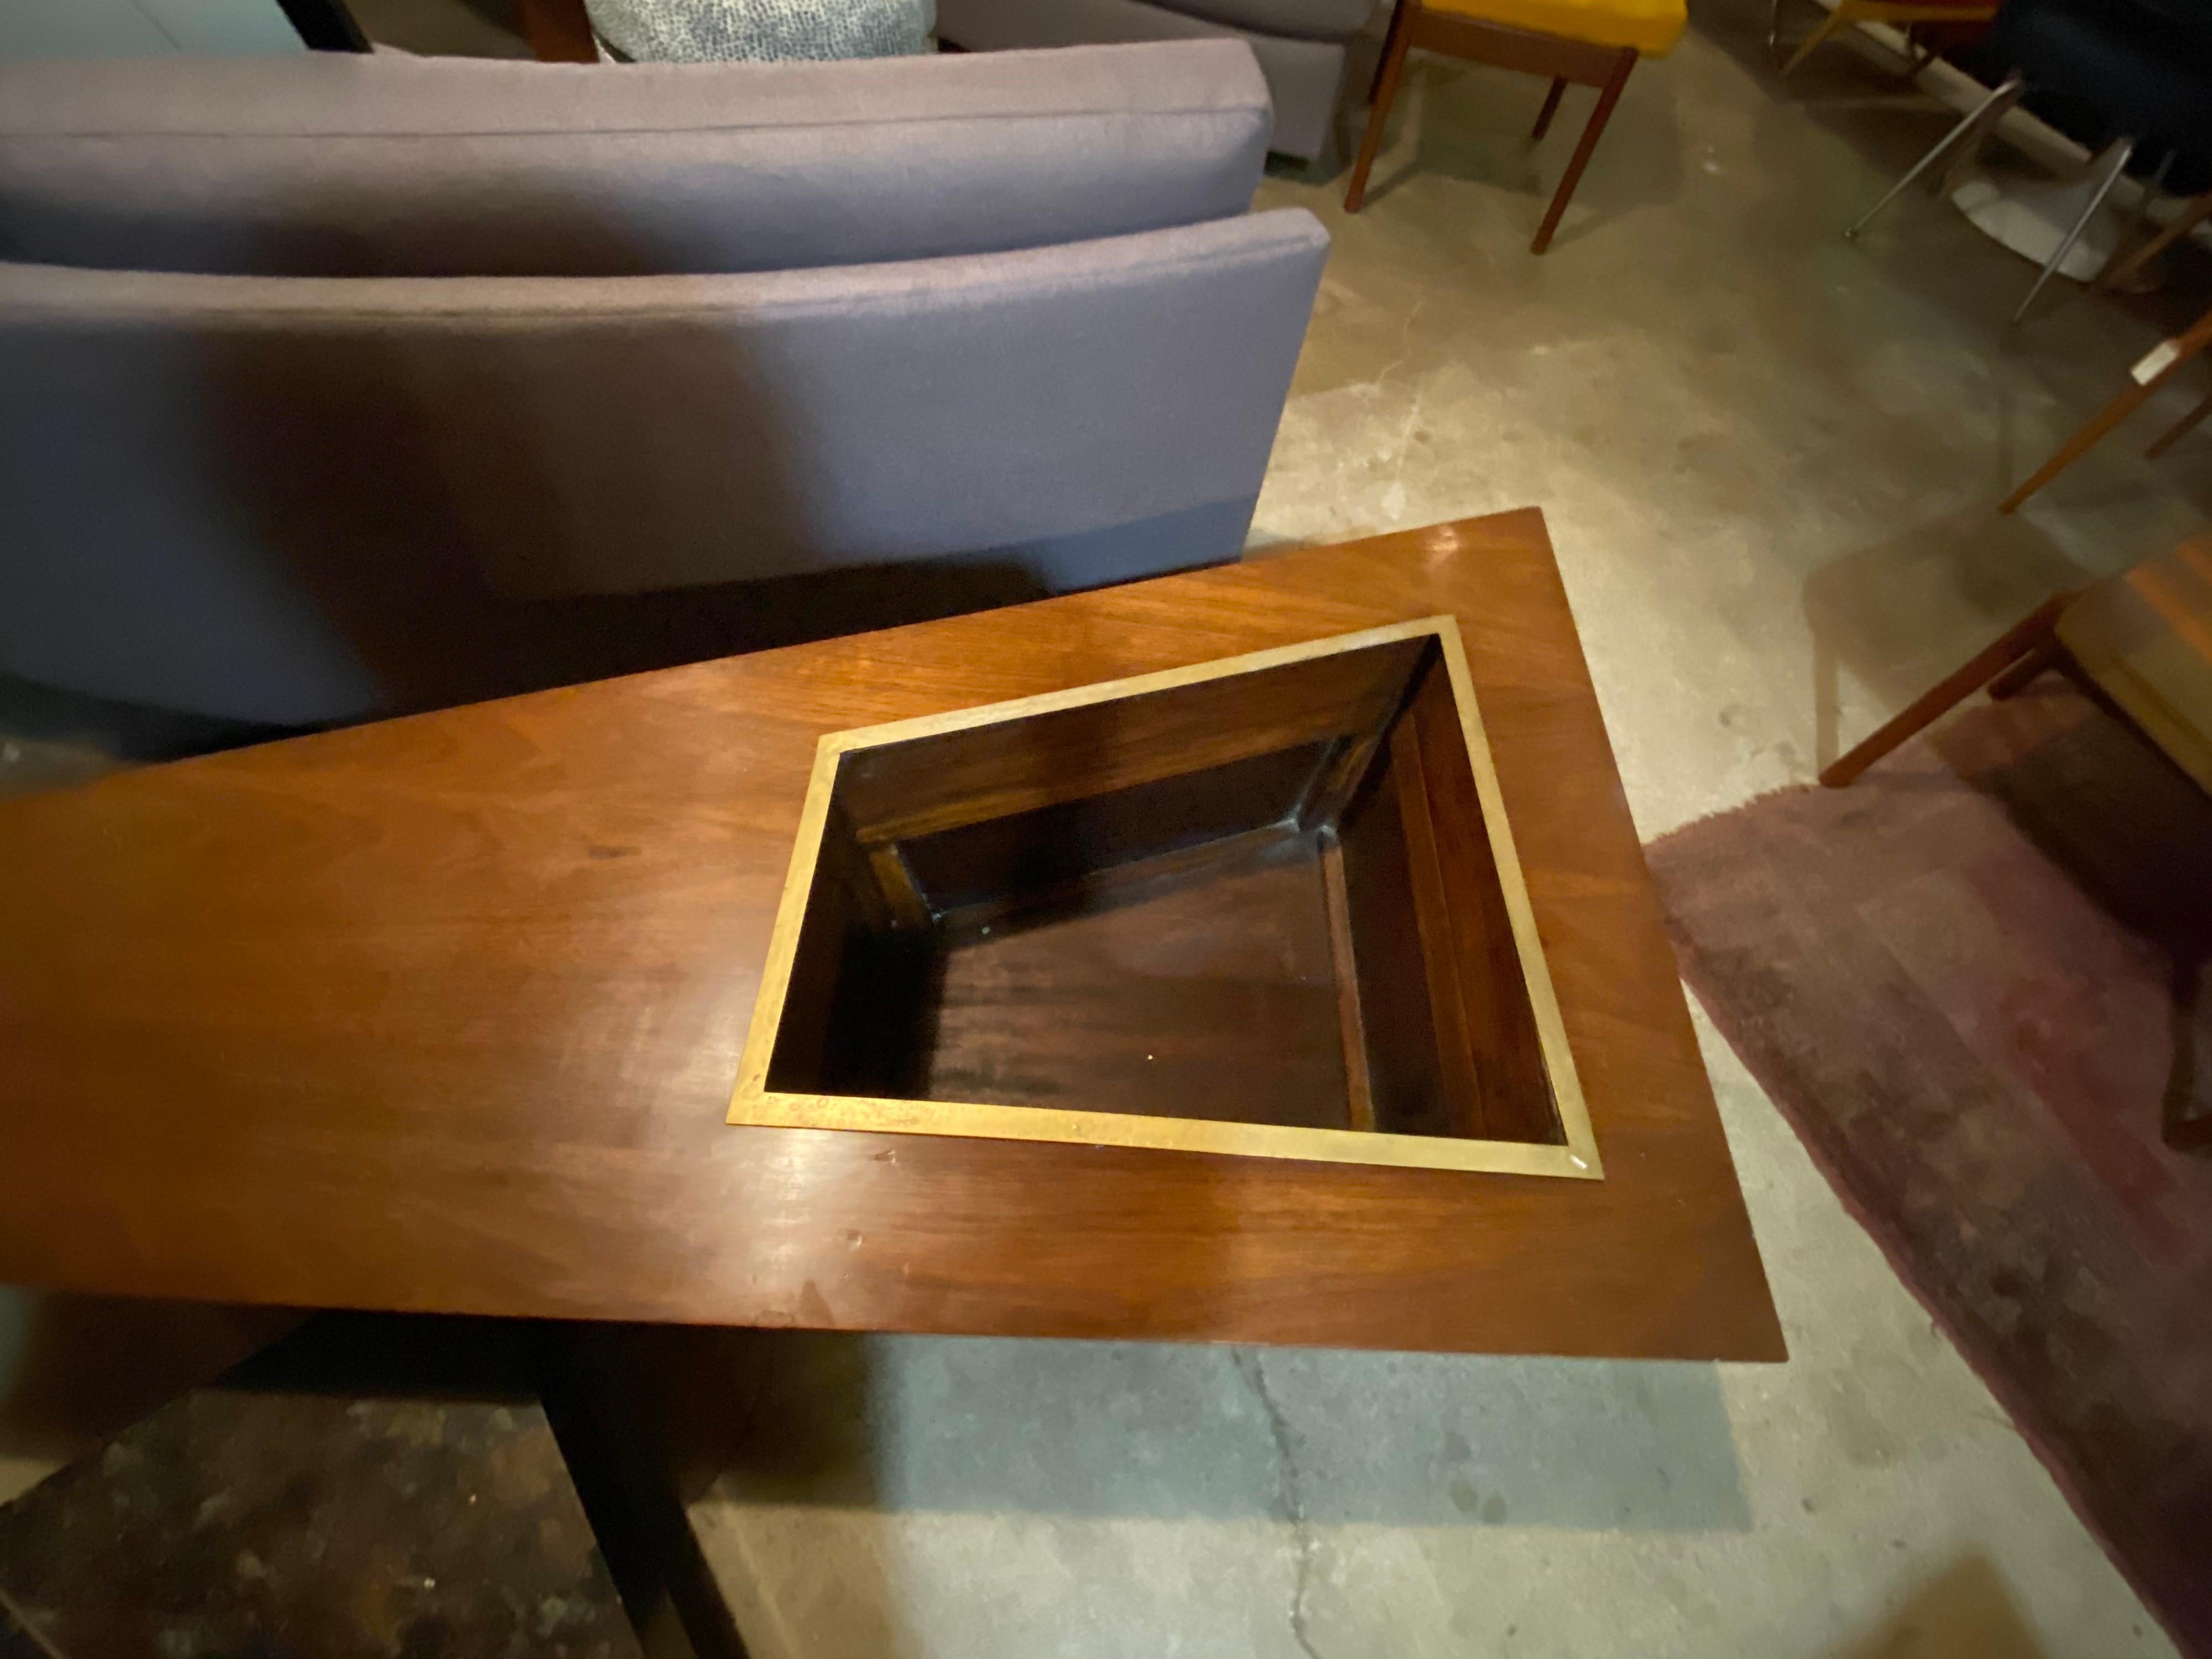 Beautiful vintage Eugenio Escudero mahogany coffee table with a built-in planter, also features a smaller table that sits below the main table that can be used separately or kept together for a unique sculptural piece. 

small table: 29.63